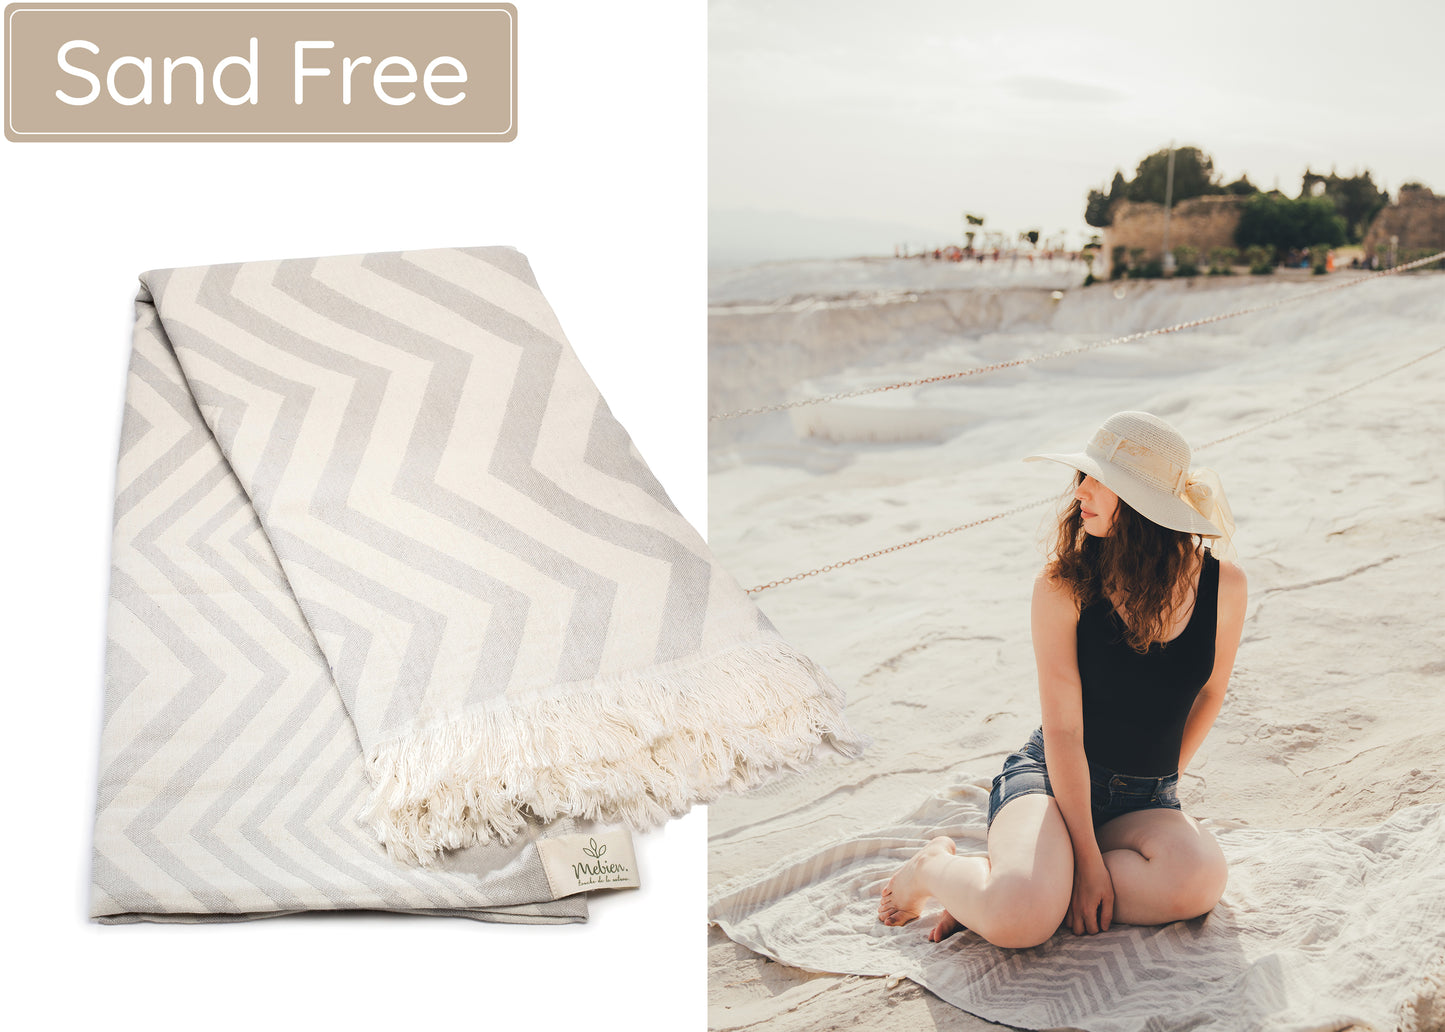 Grey and Beige Turkish Beach Towel (35”x67”)  Lightweight, Quick drying and Sand Free Can be Used as Beach Blanket 100% Cotton Ocean Design